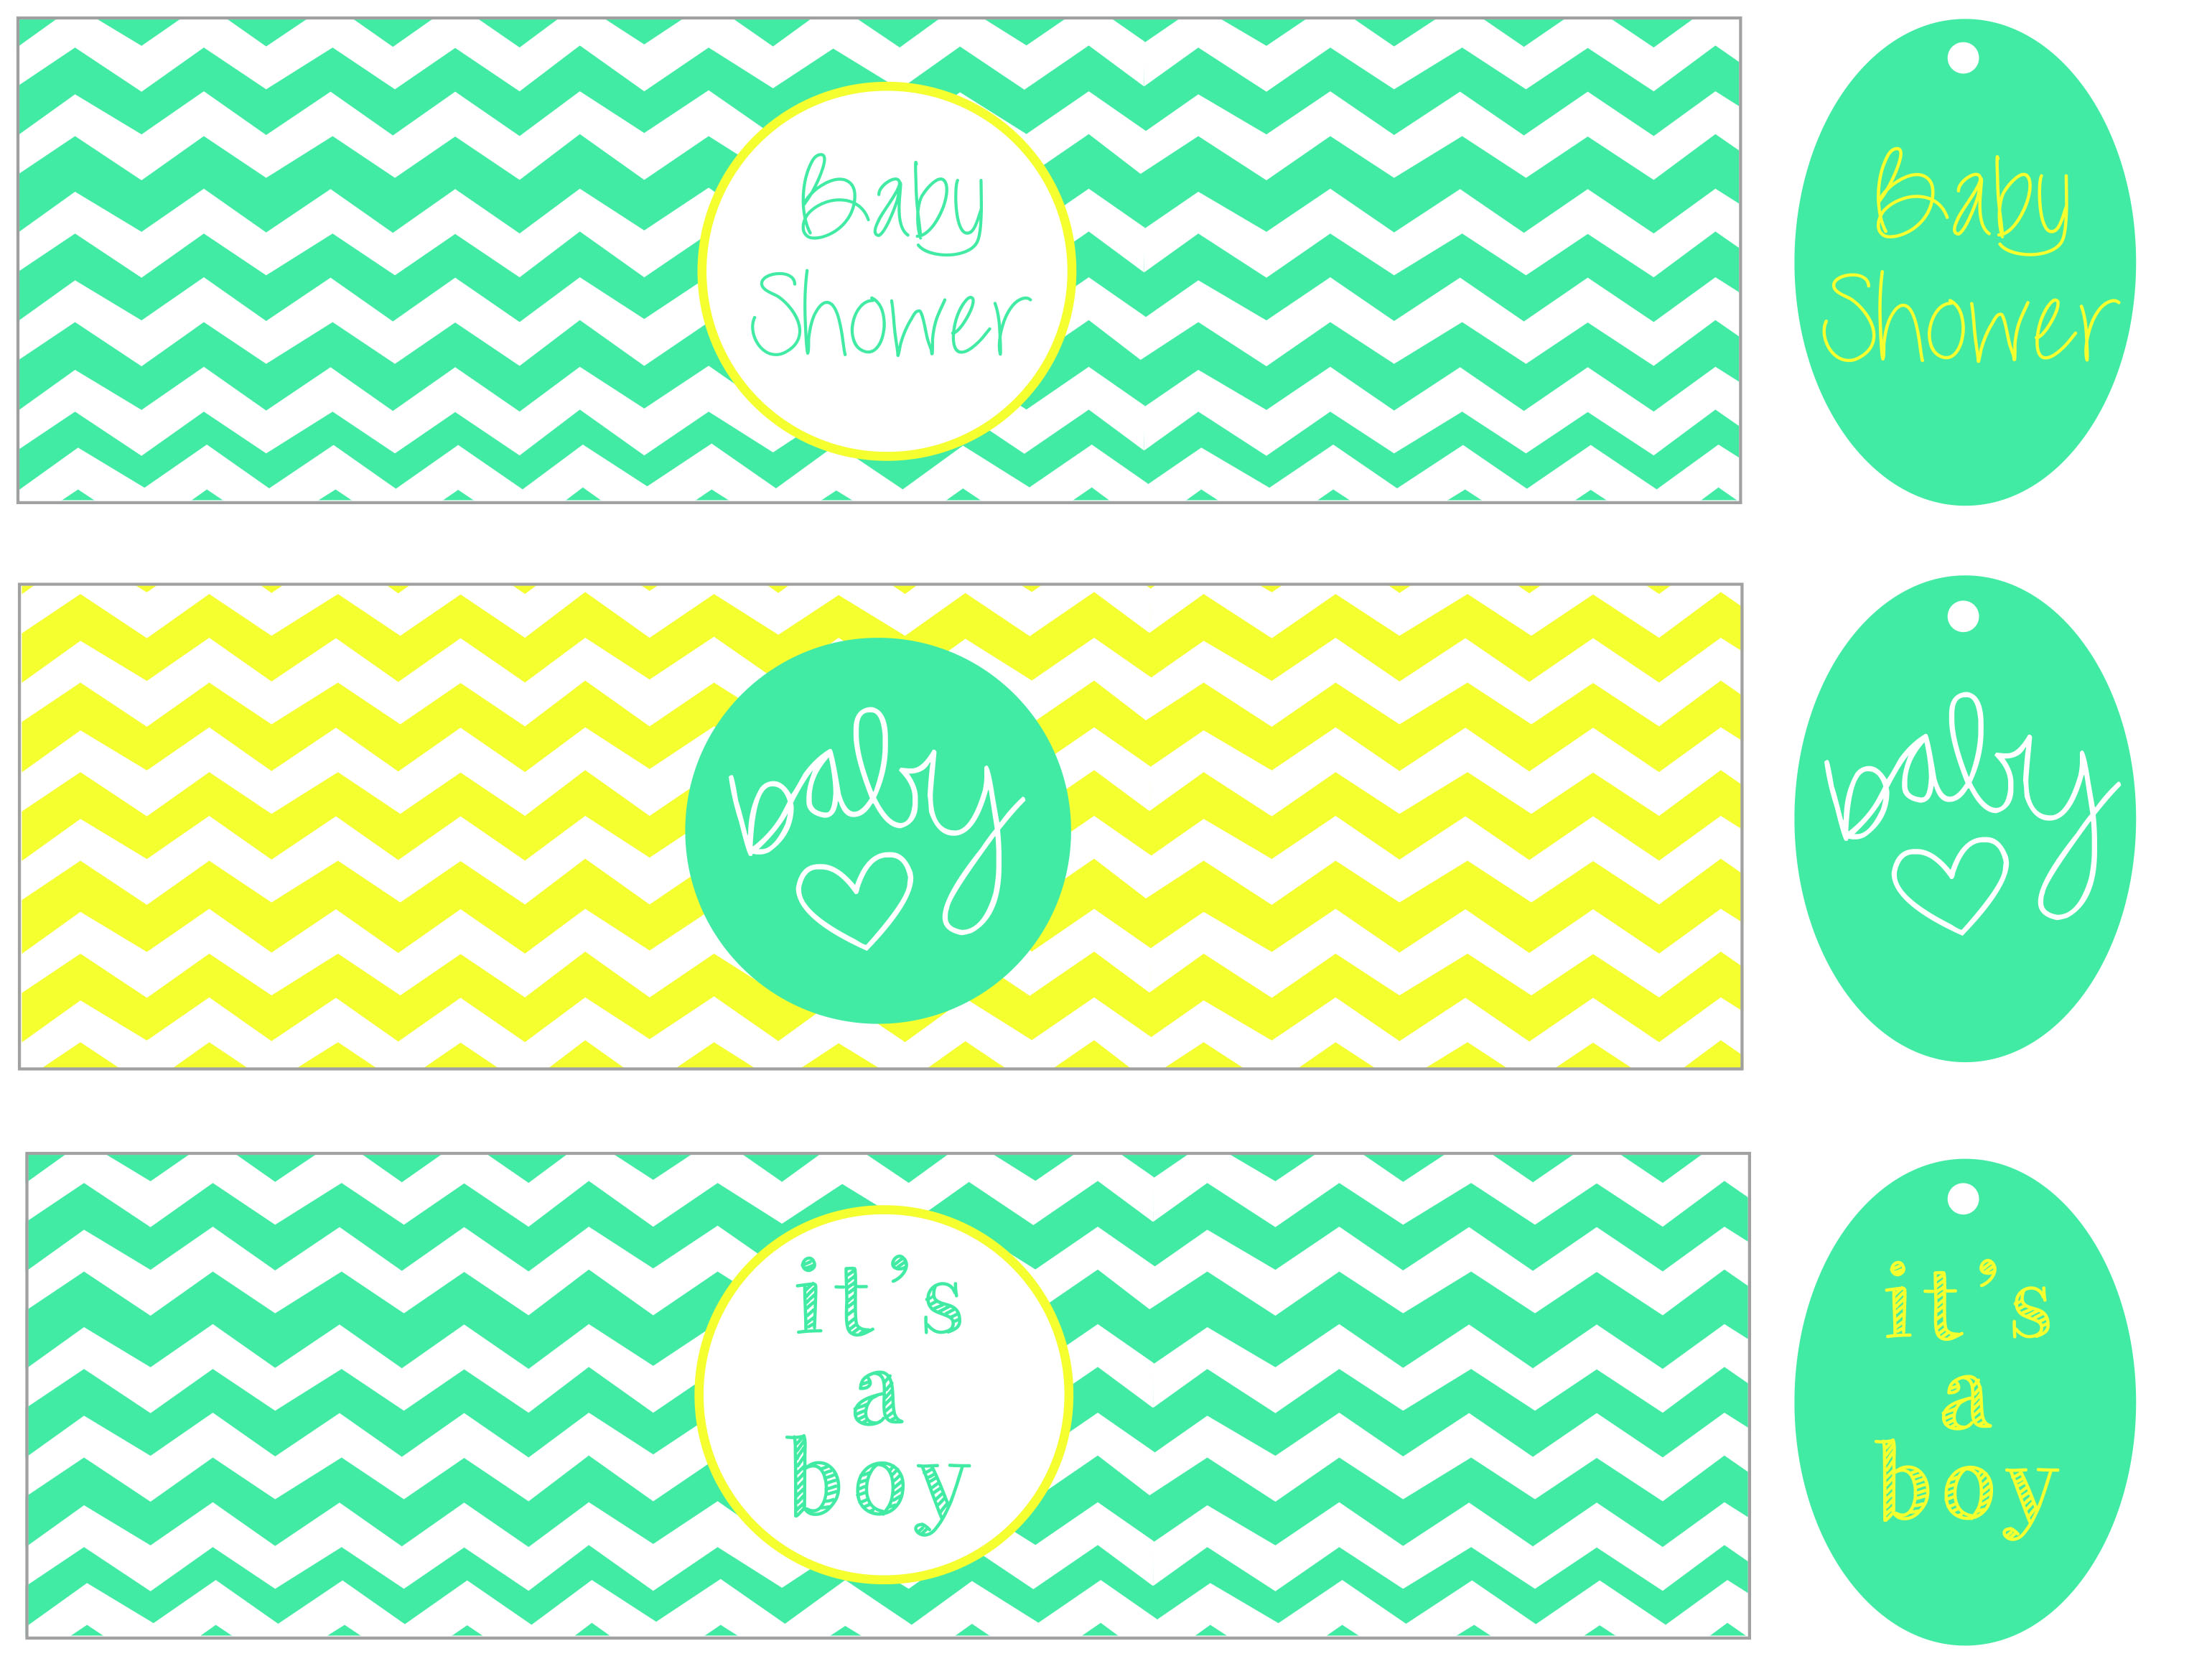 it’s a boy! Baby Shower Water Bottle Labels w/ Coordinating Tags!